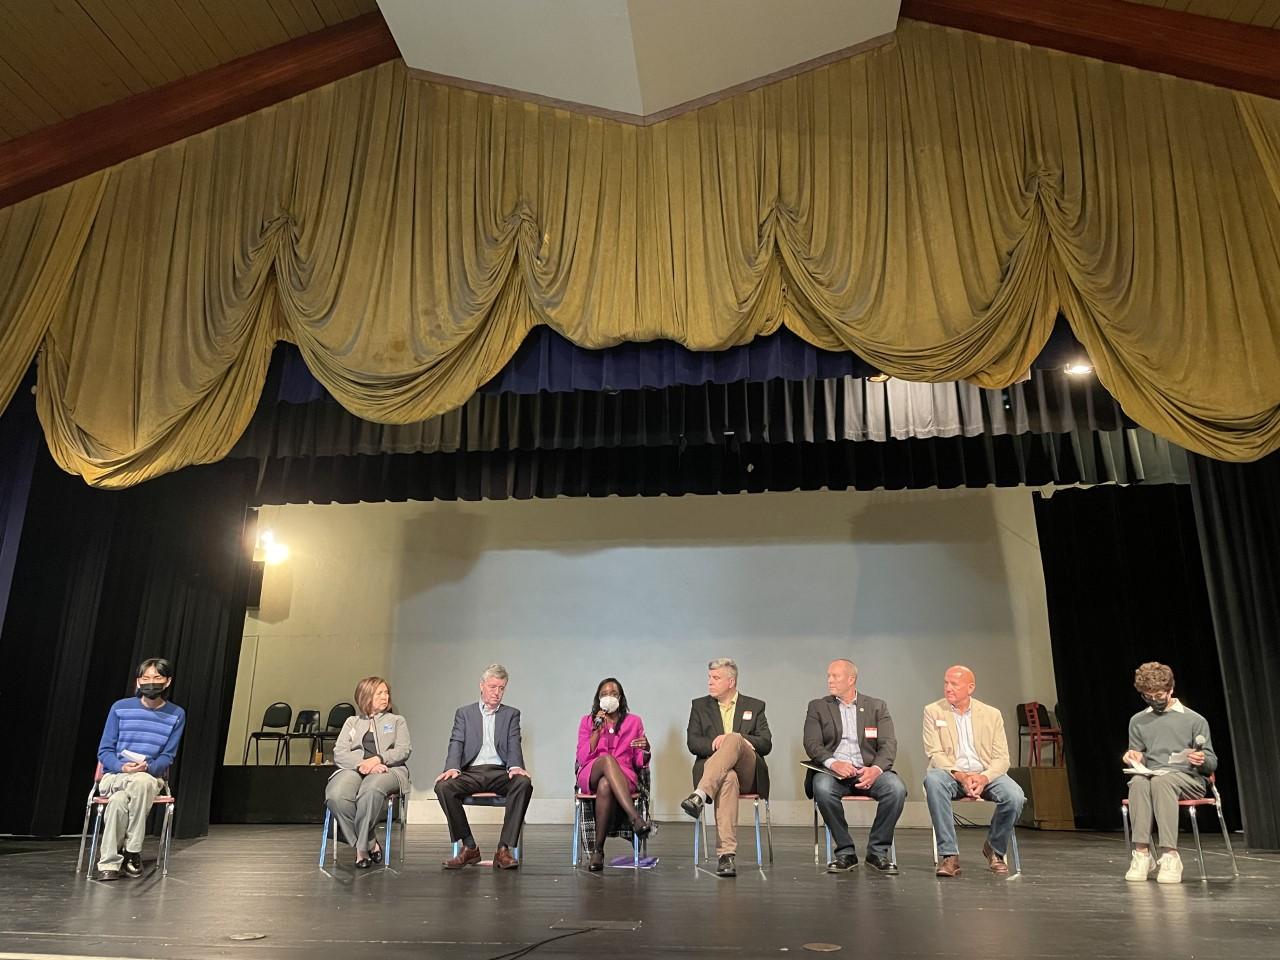 SSFUSD Superintendent Dr. Shawnterra Moore shares her life story with students during a panel discussion organized by the South San Francisco Youth Commission.